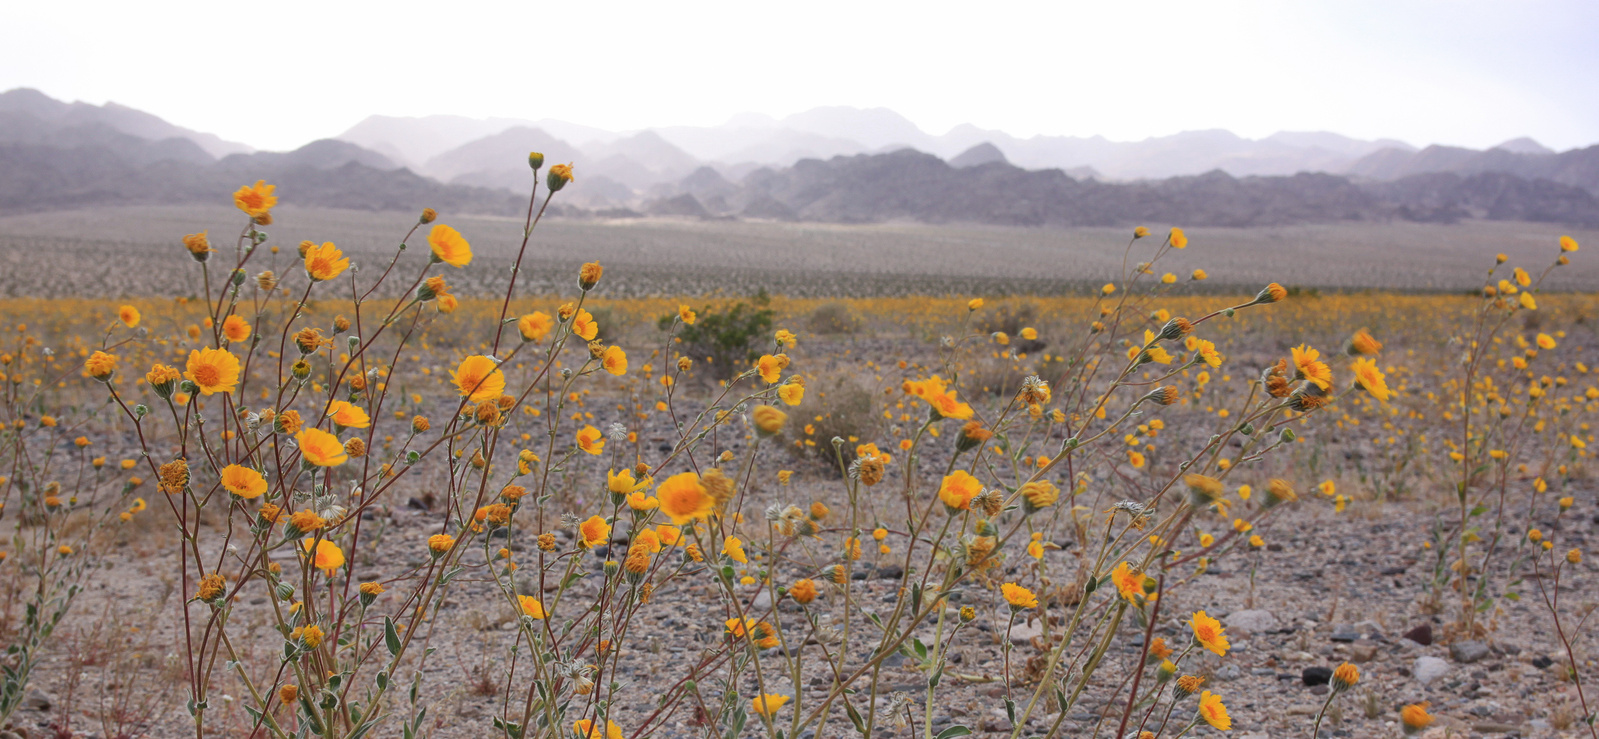 Desert gold wildflowers stretch into the distance during a spring superbloom in Death Valley, California.